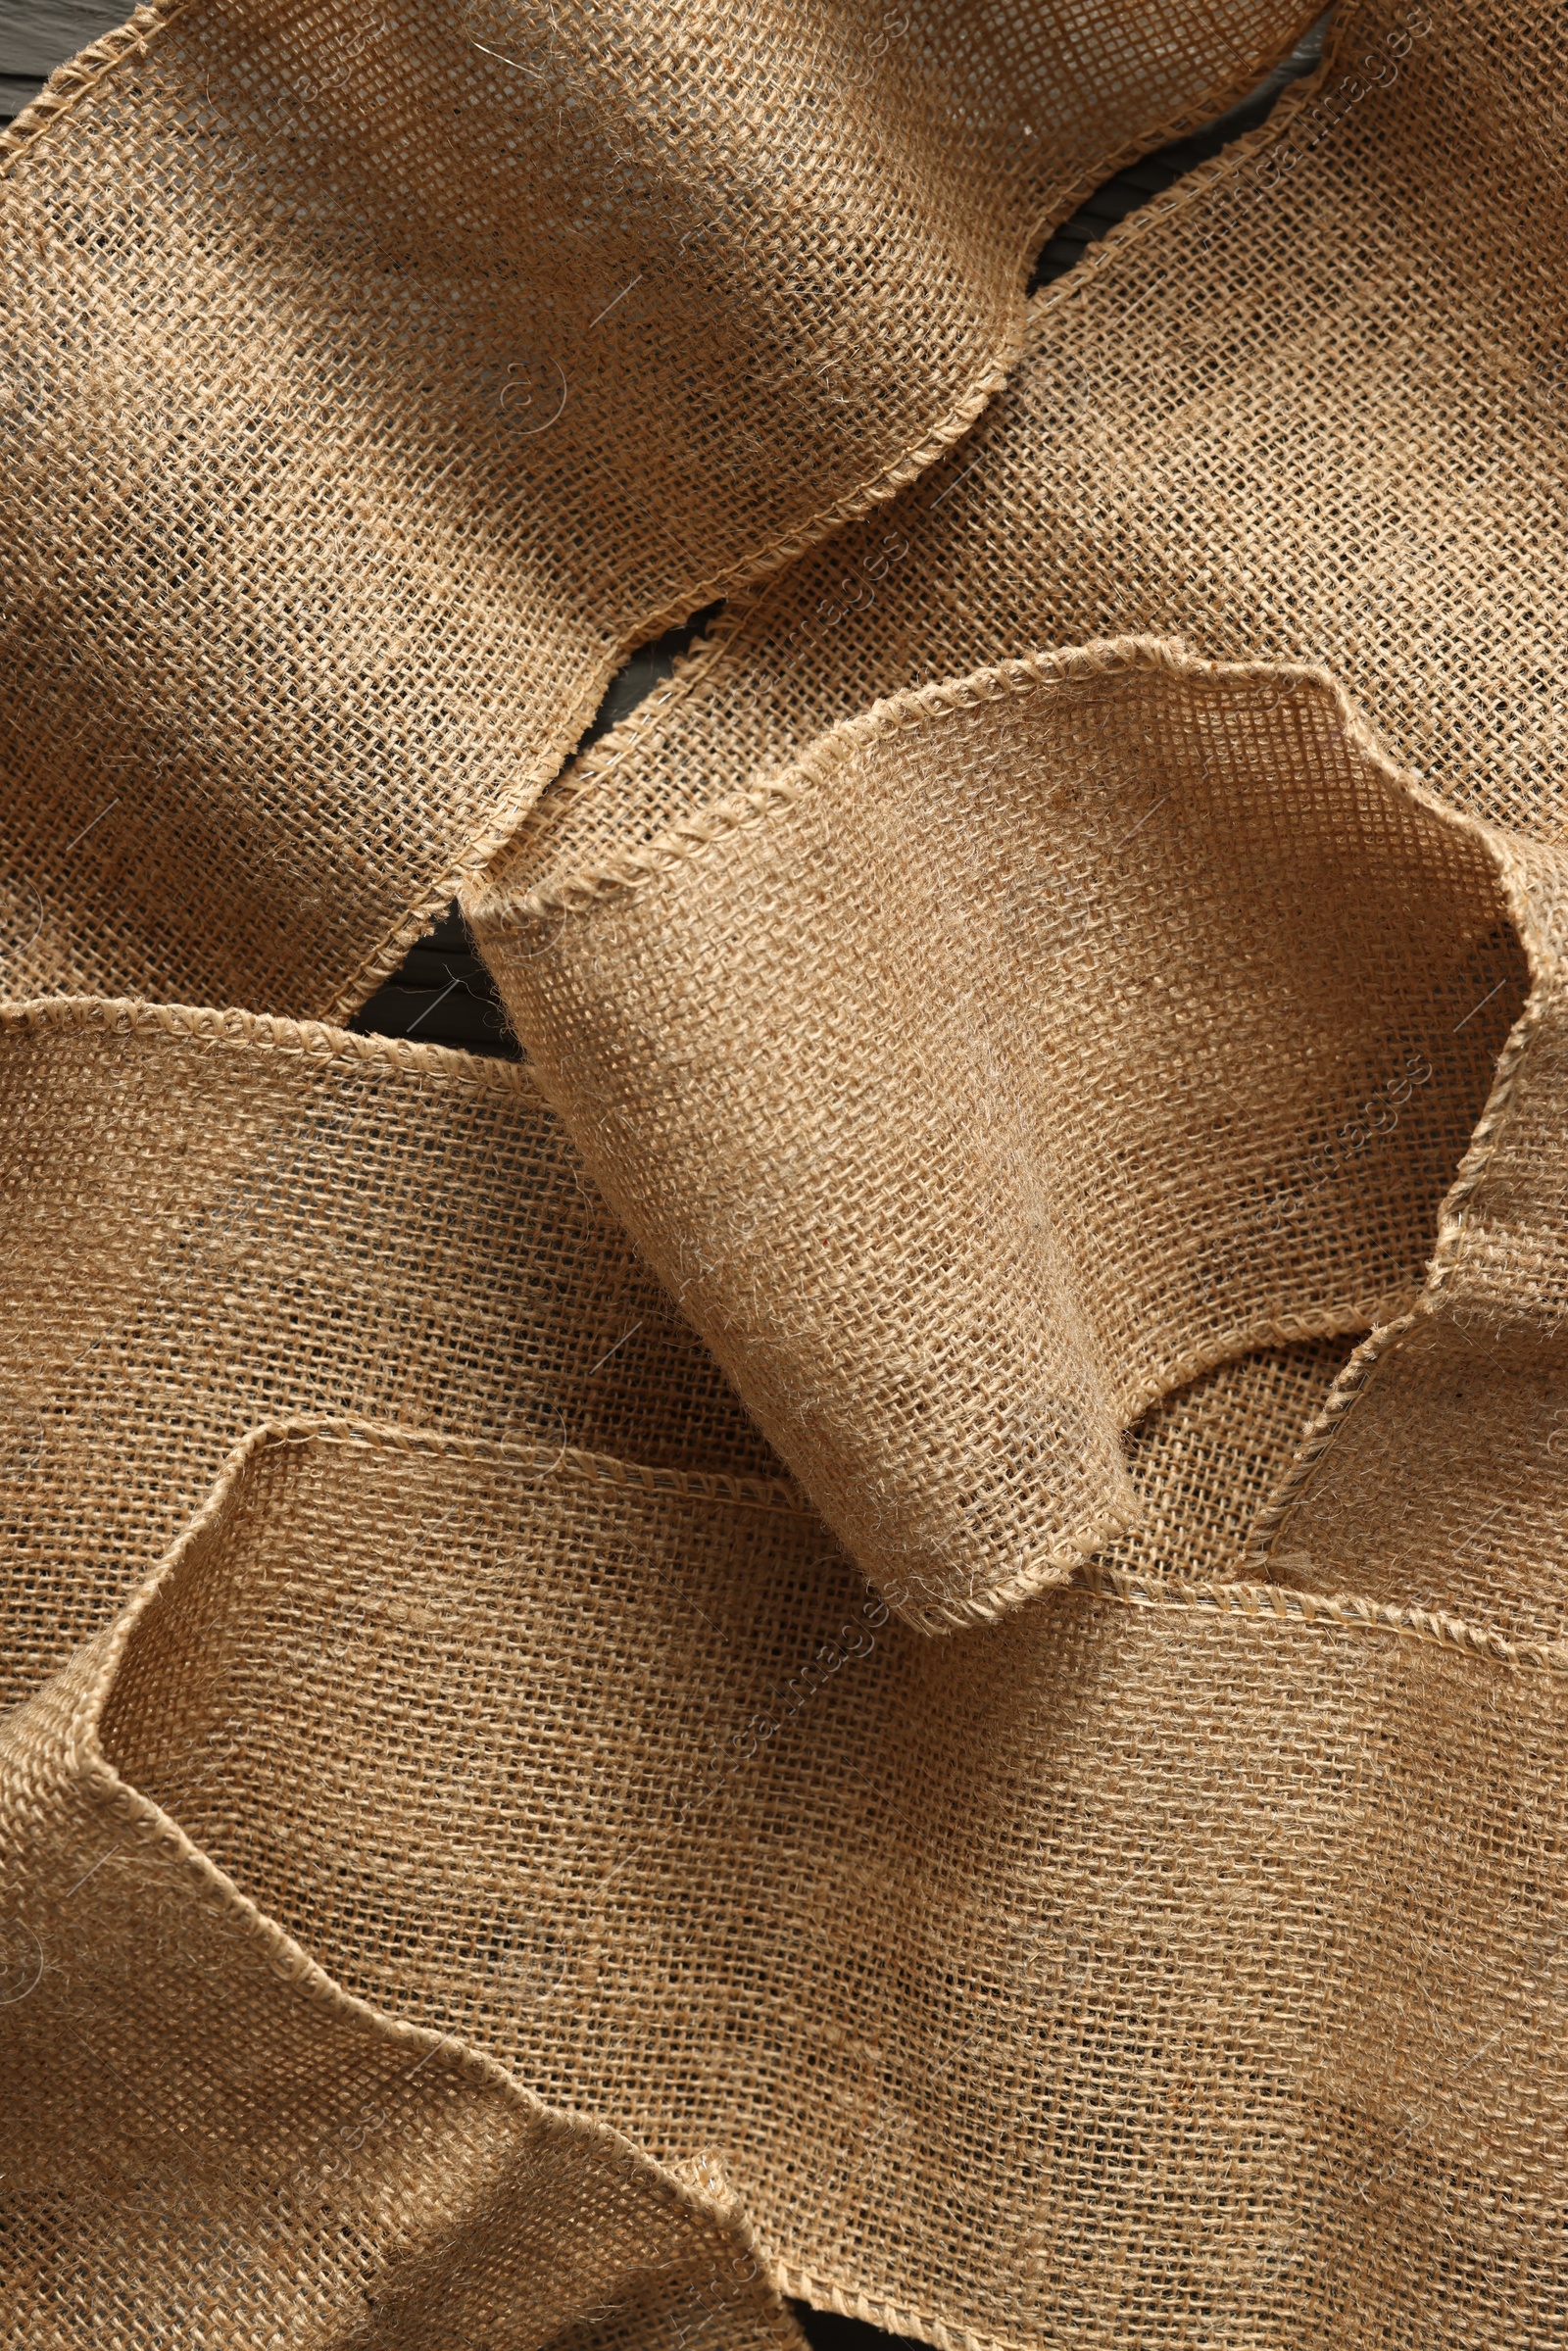 Photo of Pieces of burlap fabric as background, top view